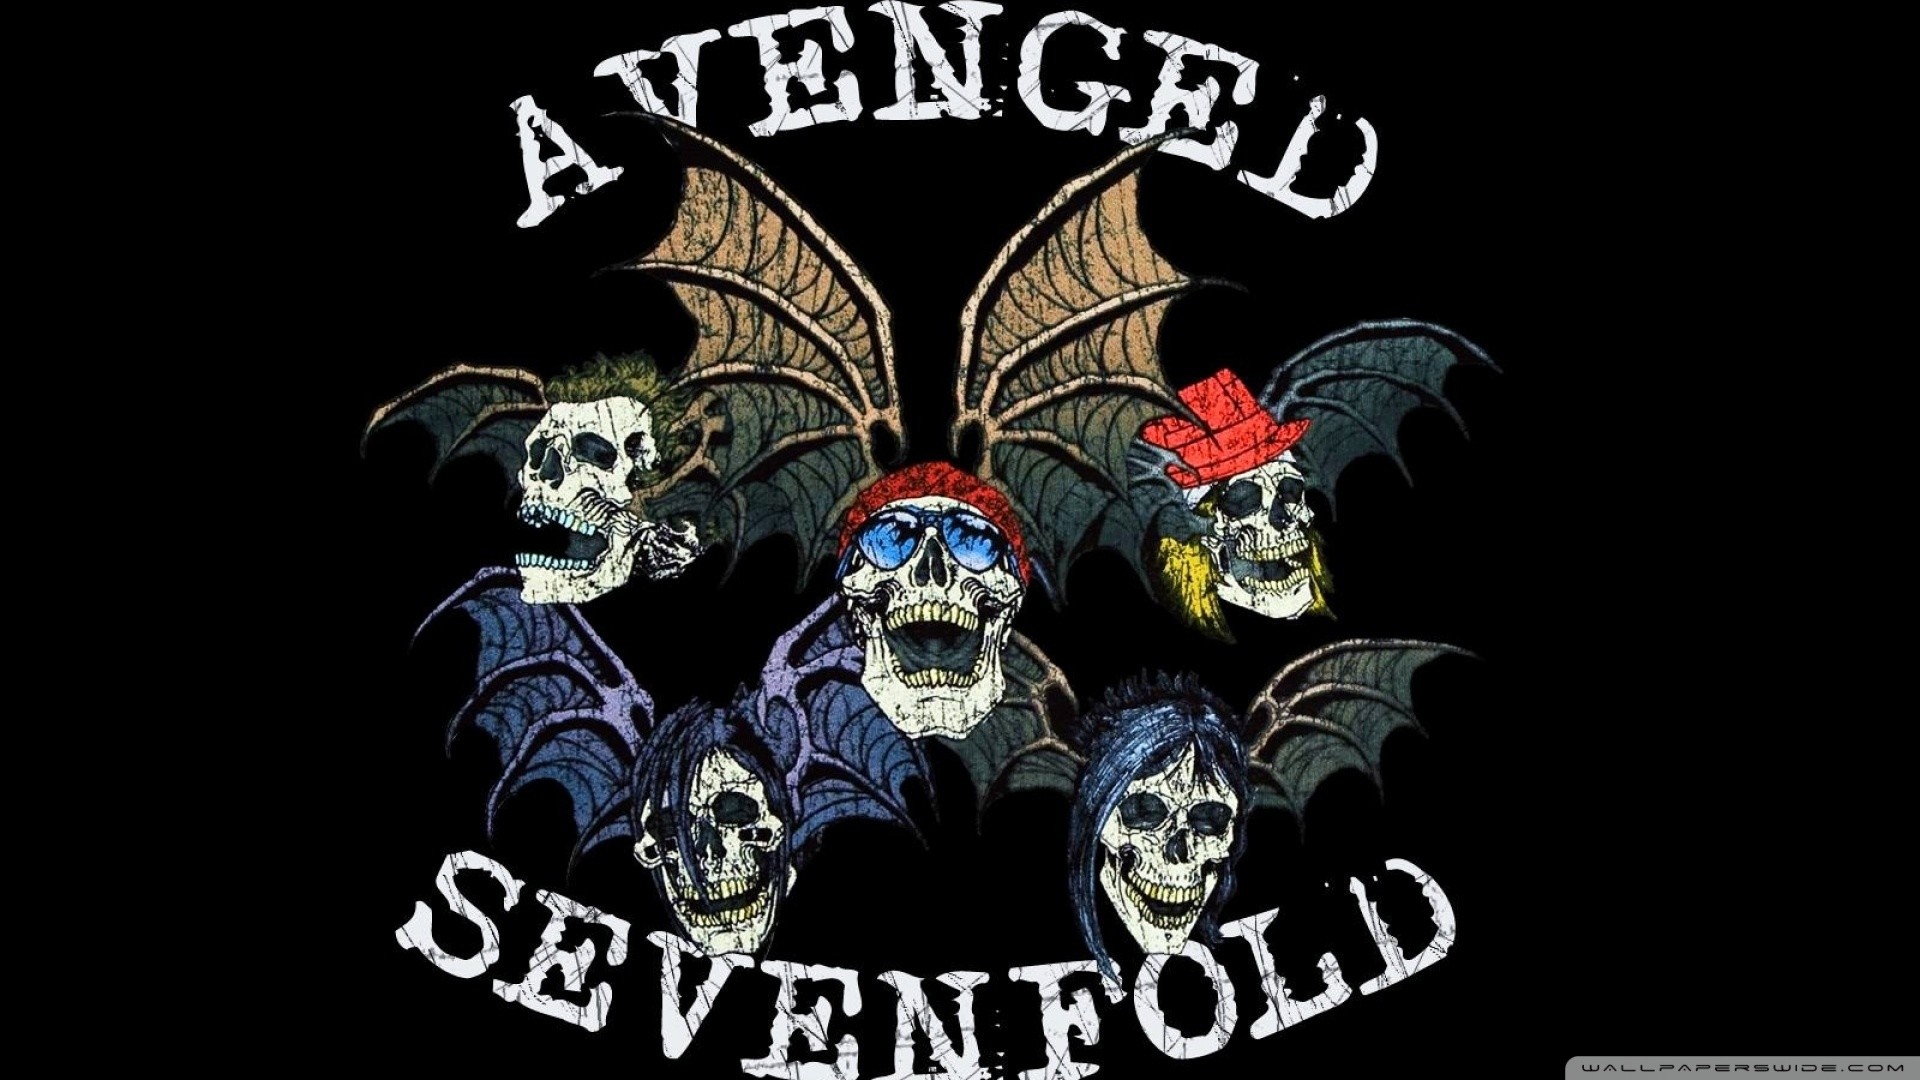 7. avenged sevenfold wallpapers HD6 600×338